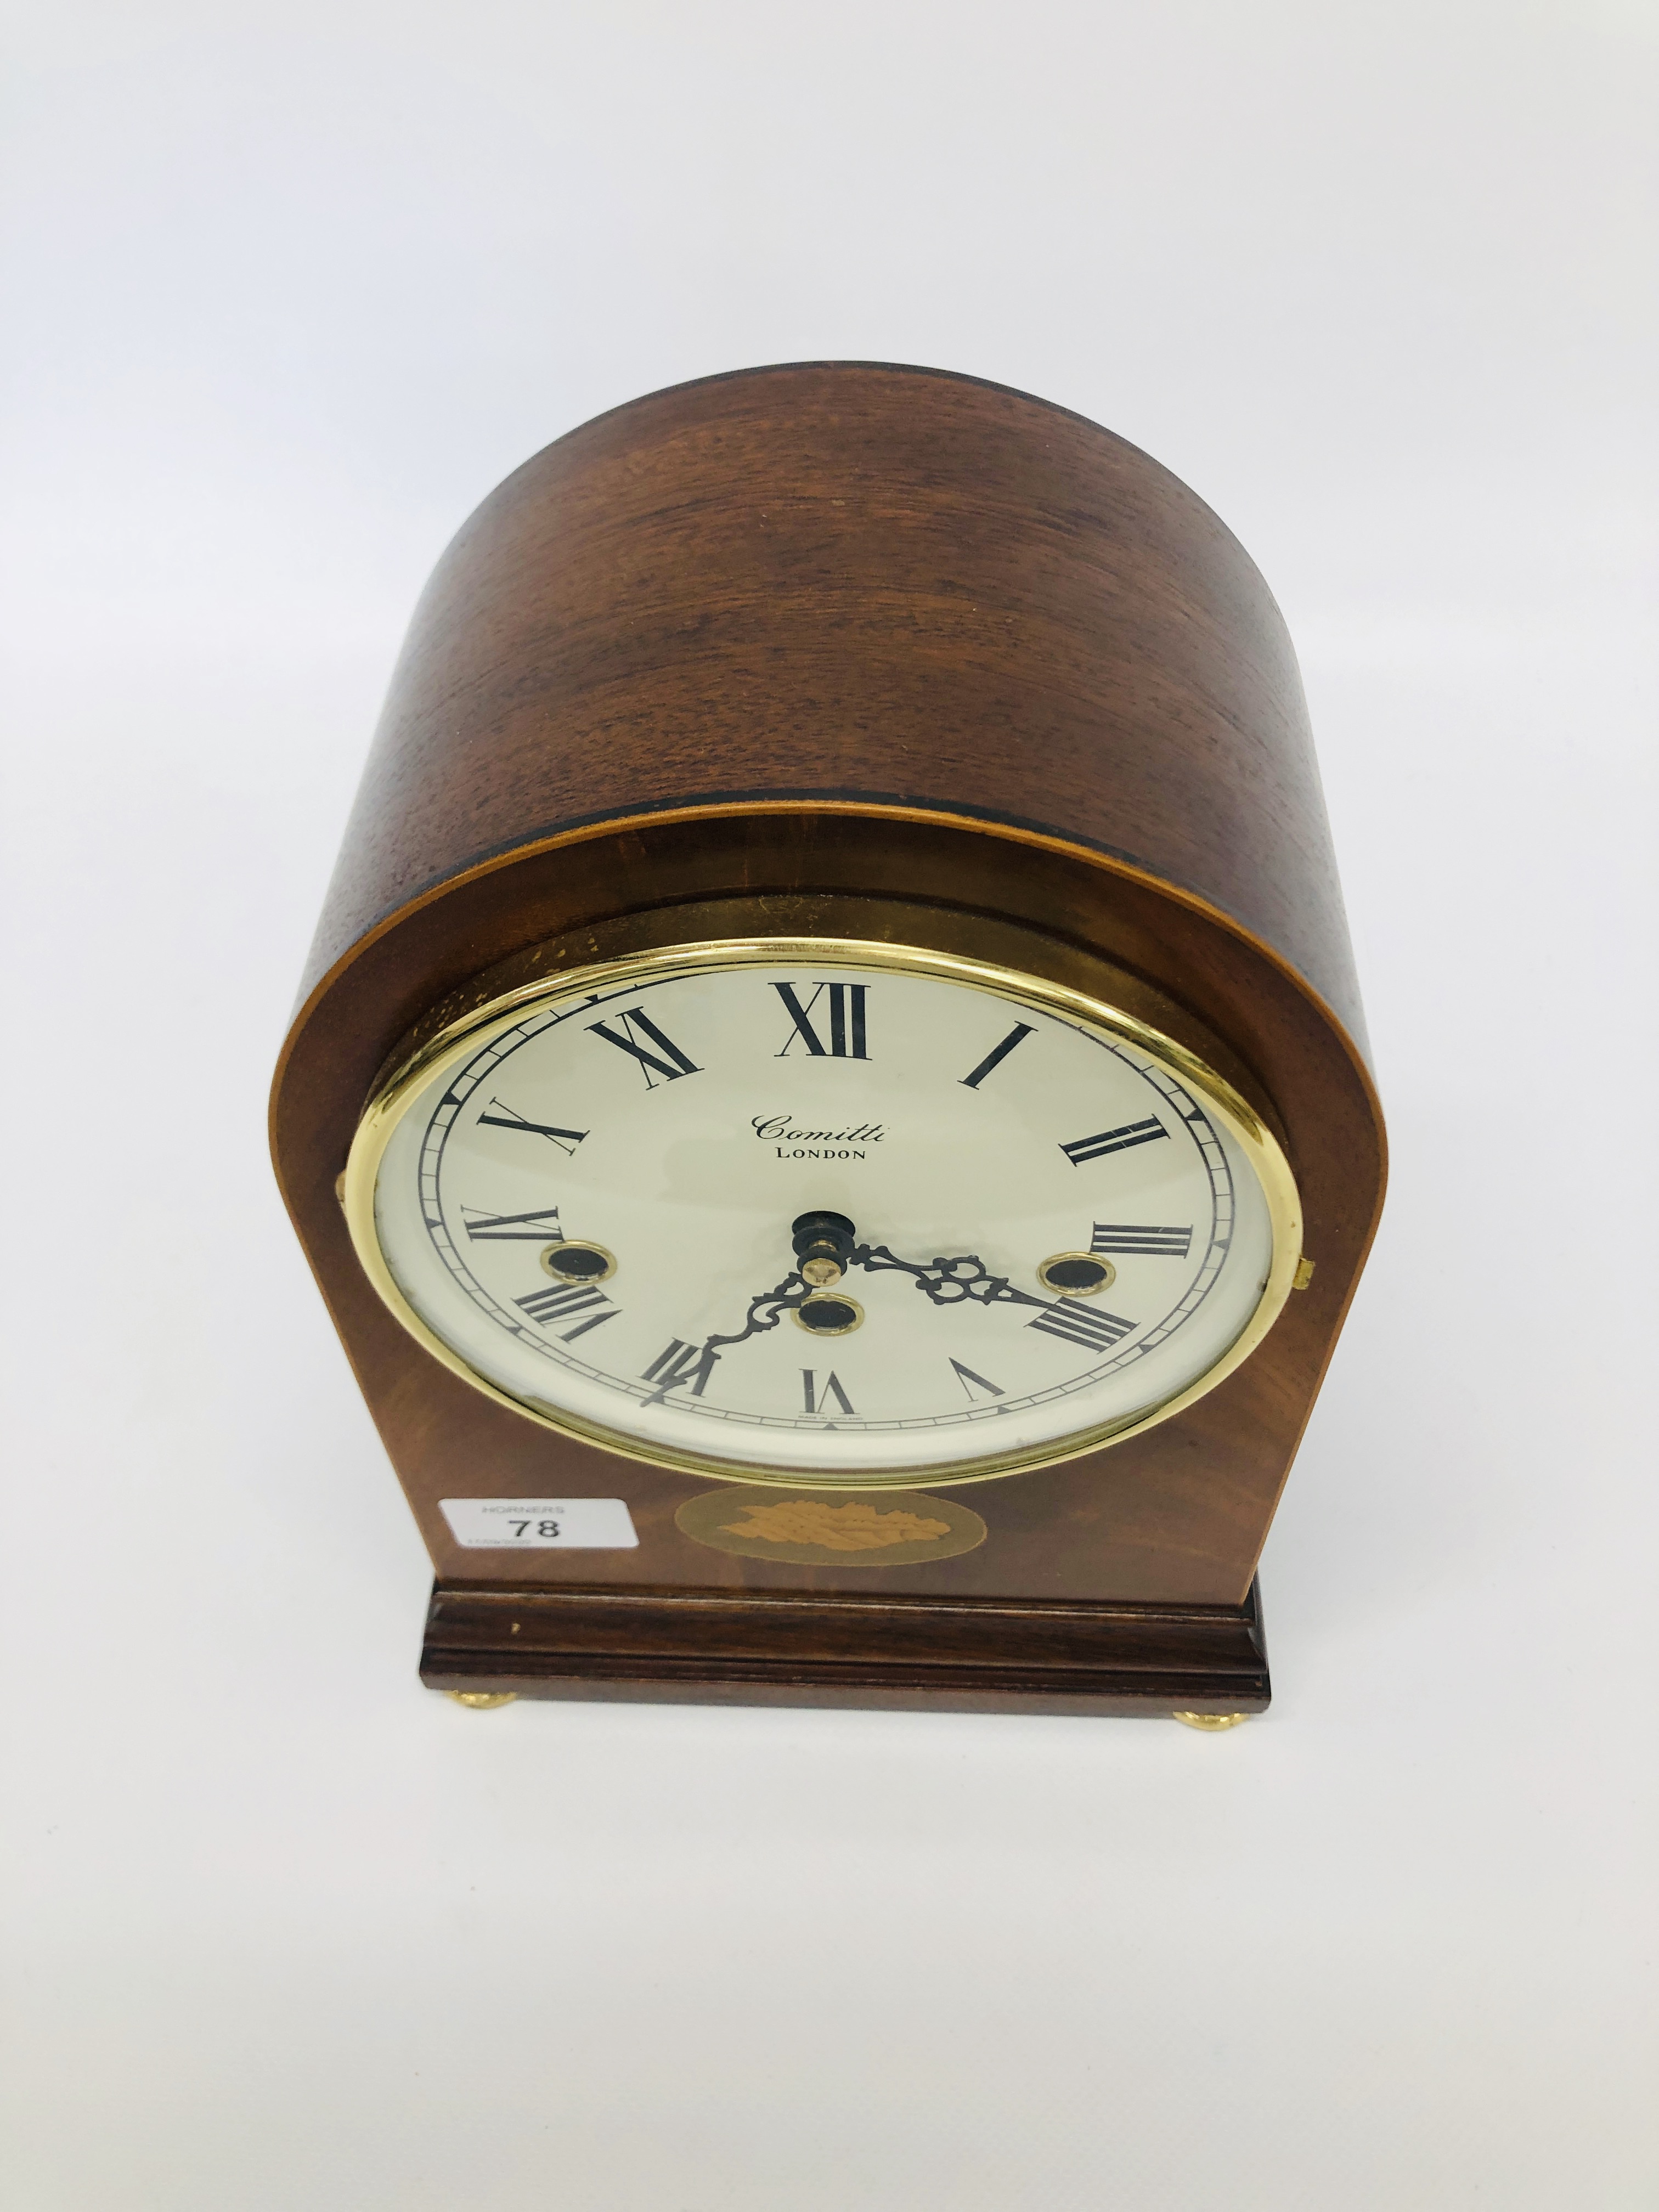 A GOOD QUALITY REPRODUCTION DOME TOP MAHOGANY MANTEL CLOCK WITH WESTMINSTER CHIME THE DIAL MARKED - Image 5 of 7